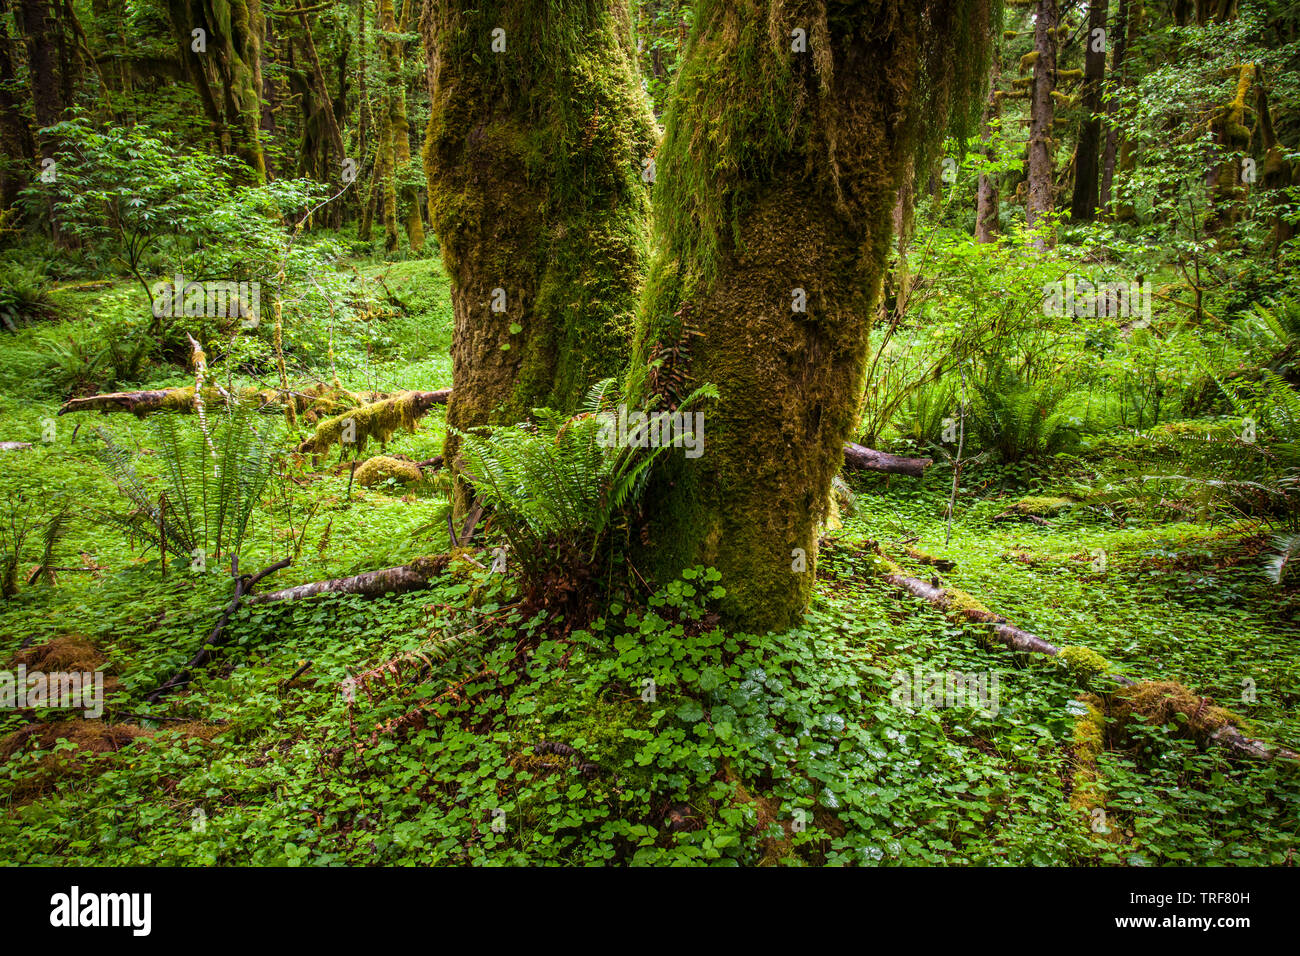 A moss covered tree trunk in the Quinault Rainforest, Olympic National Park, Washington, USA. Stock Photo